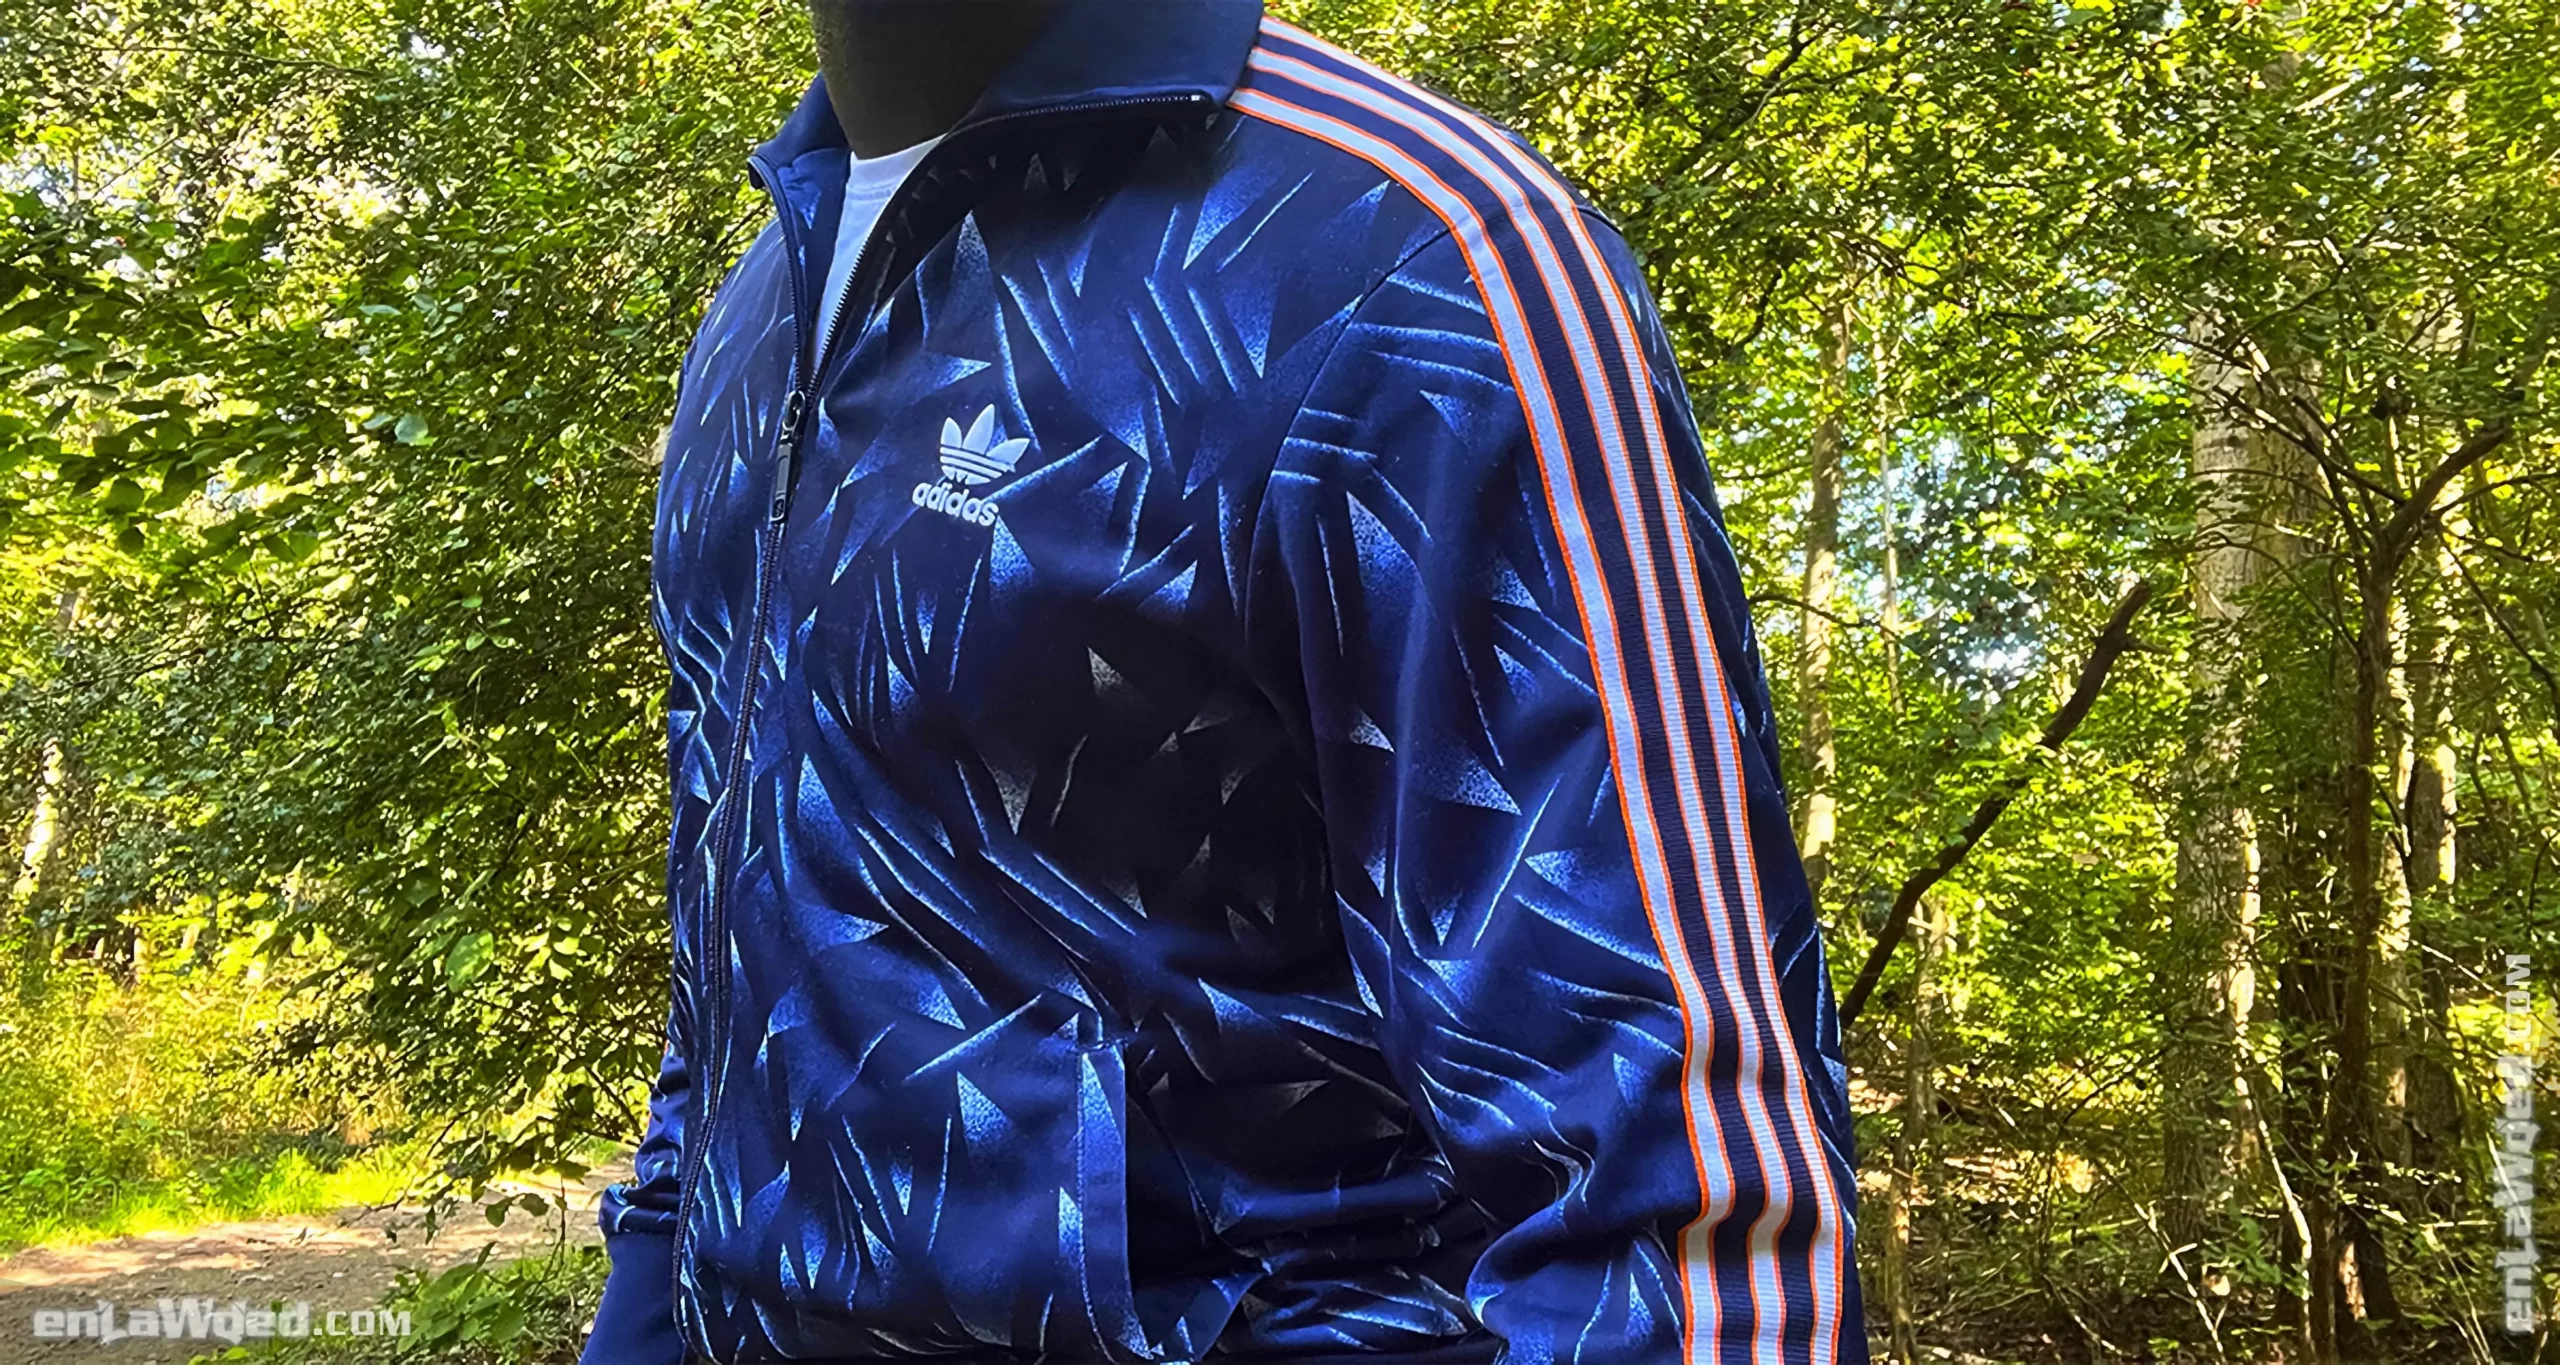 Men’s 2007 Adidas Liverpool 1989-91 Candy Away TT: Covert (EnLawded.com file #lp1l6red12631438evbzghf5w)